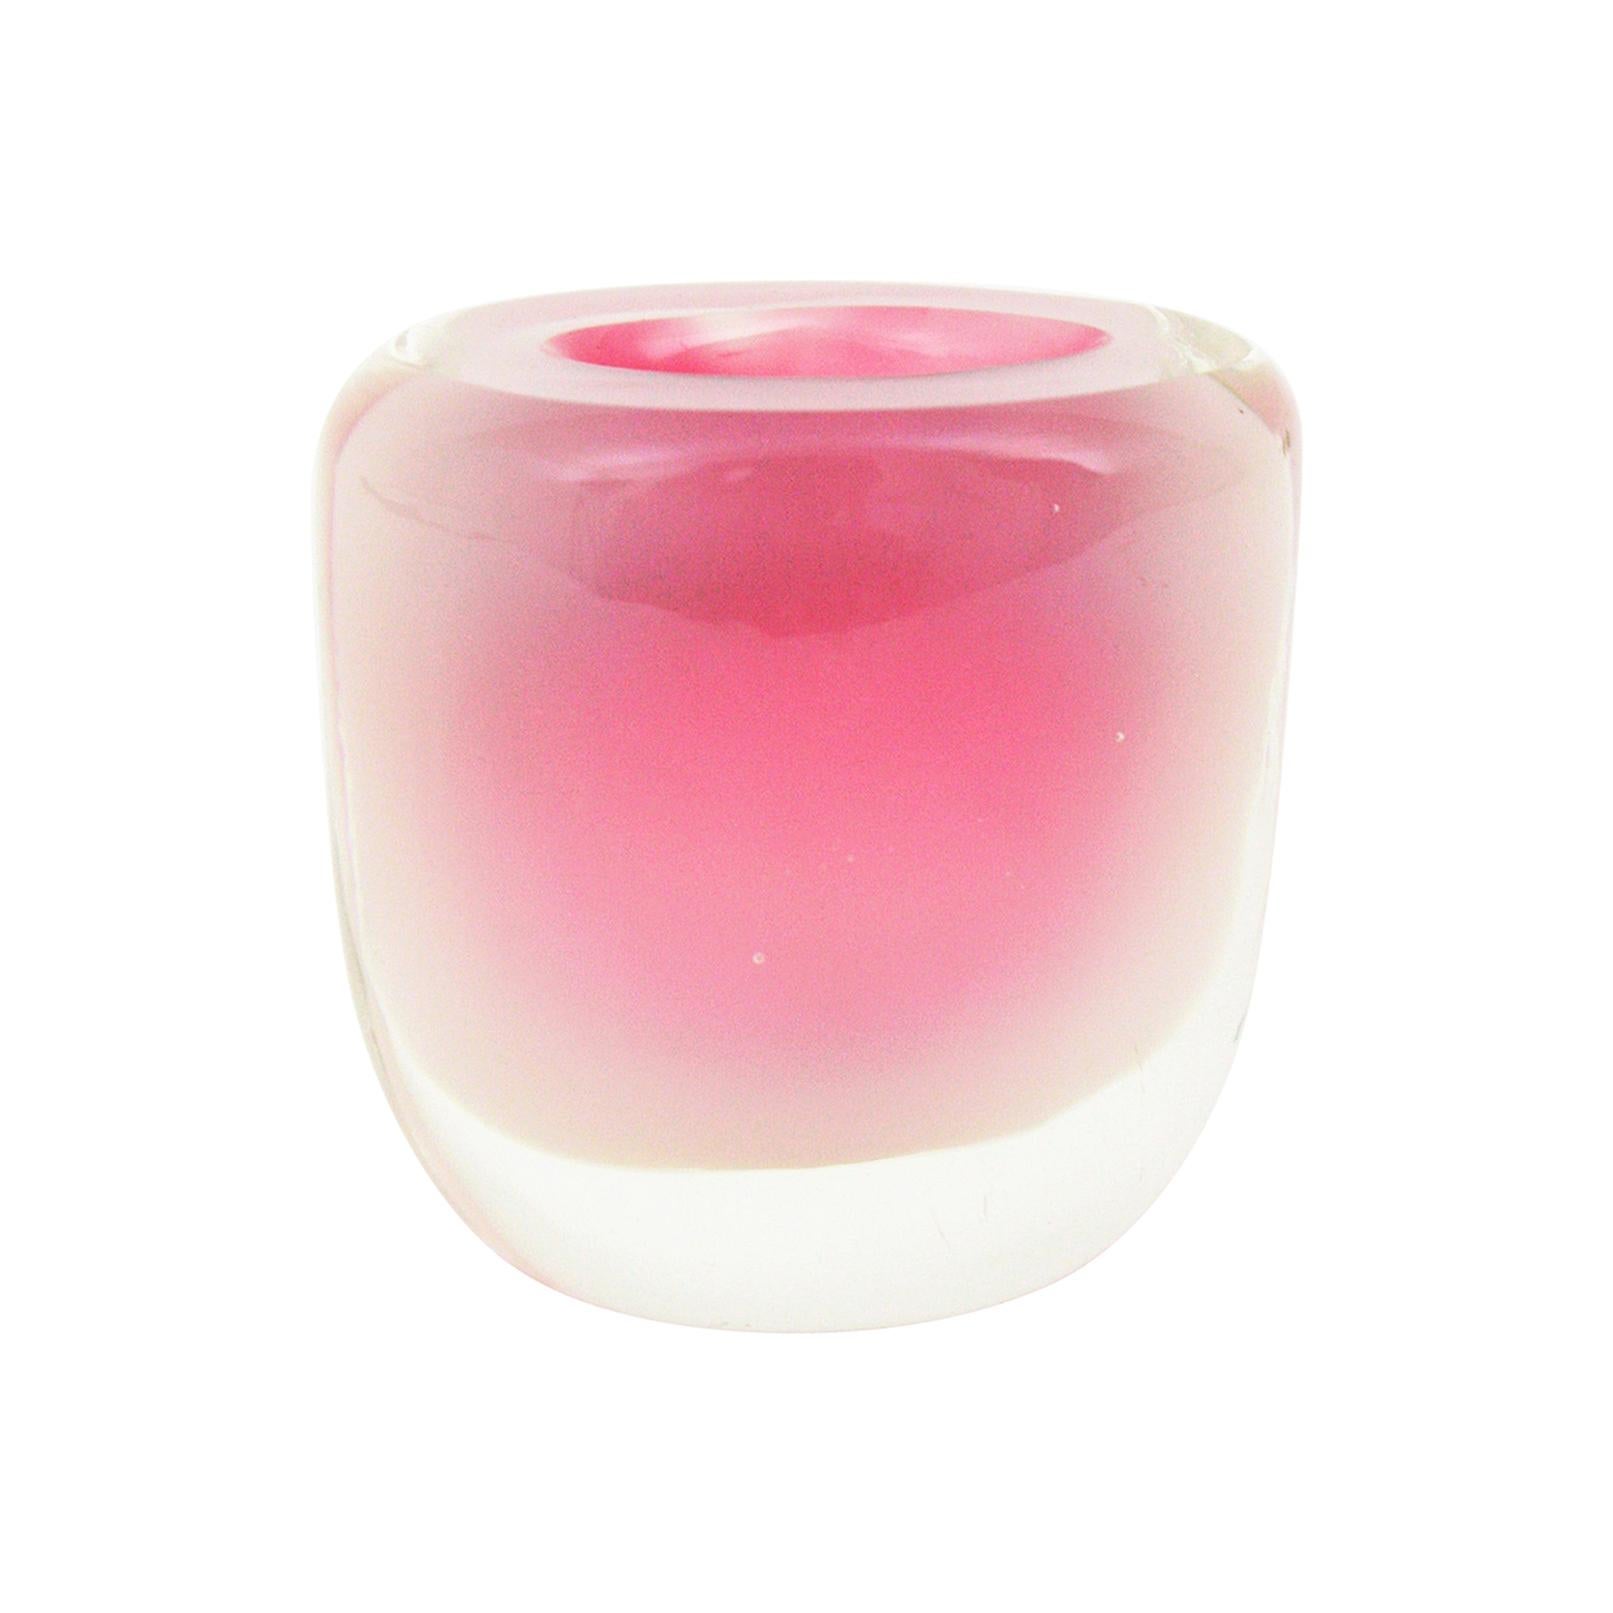 Archimede Seguso Murano Opal Pink Alabastro White Glass Small Geode Bowl or Vase